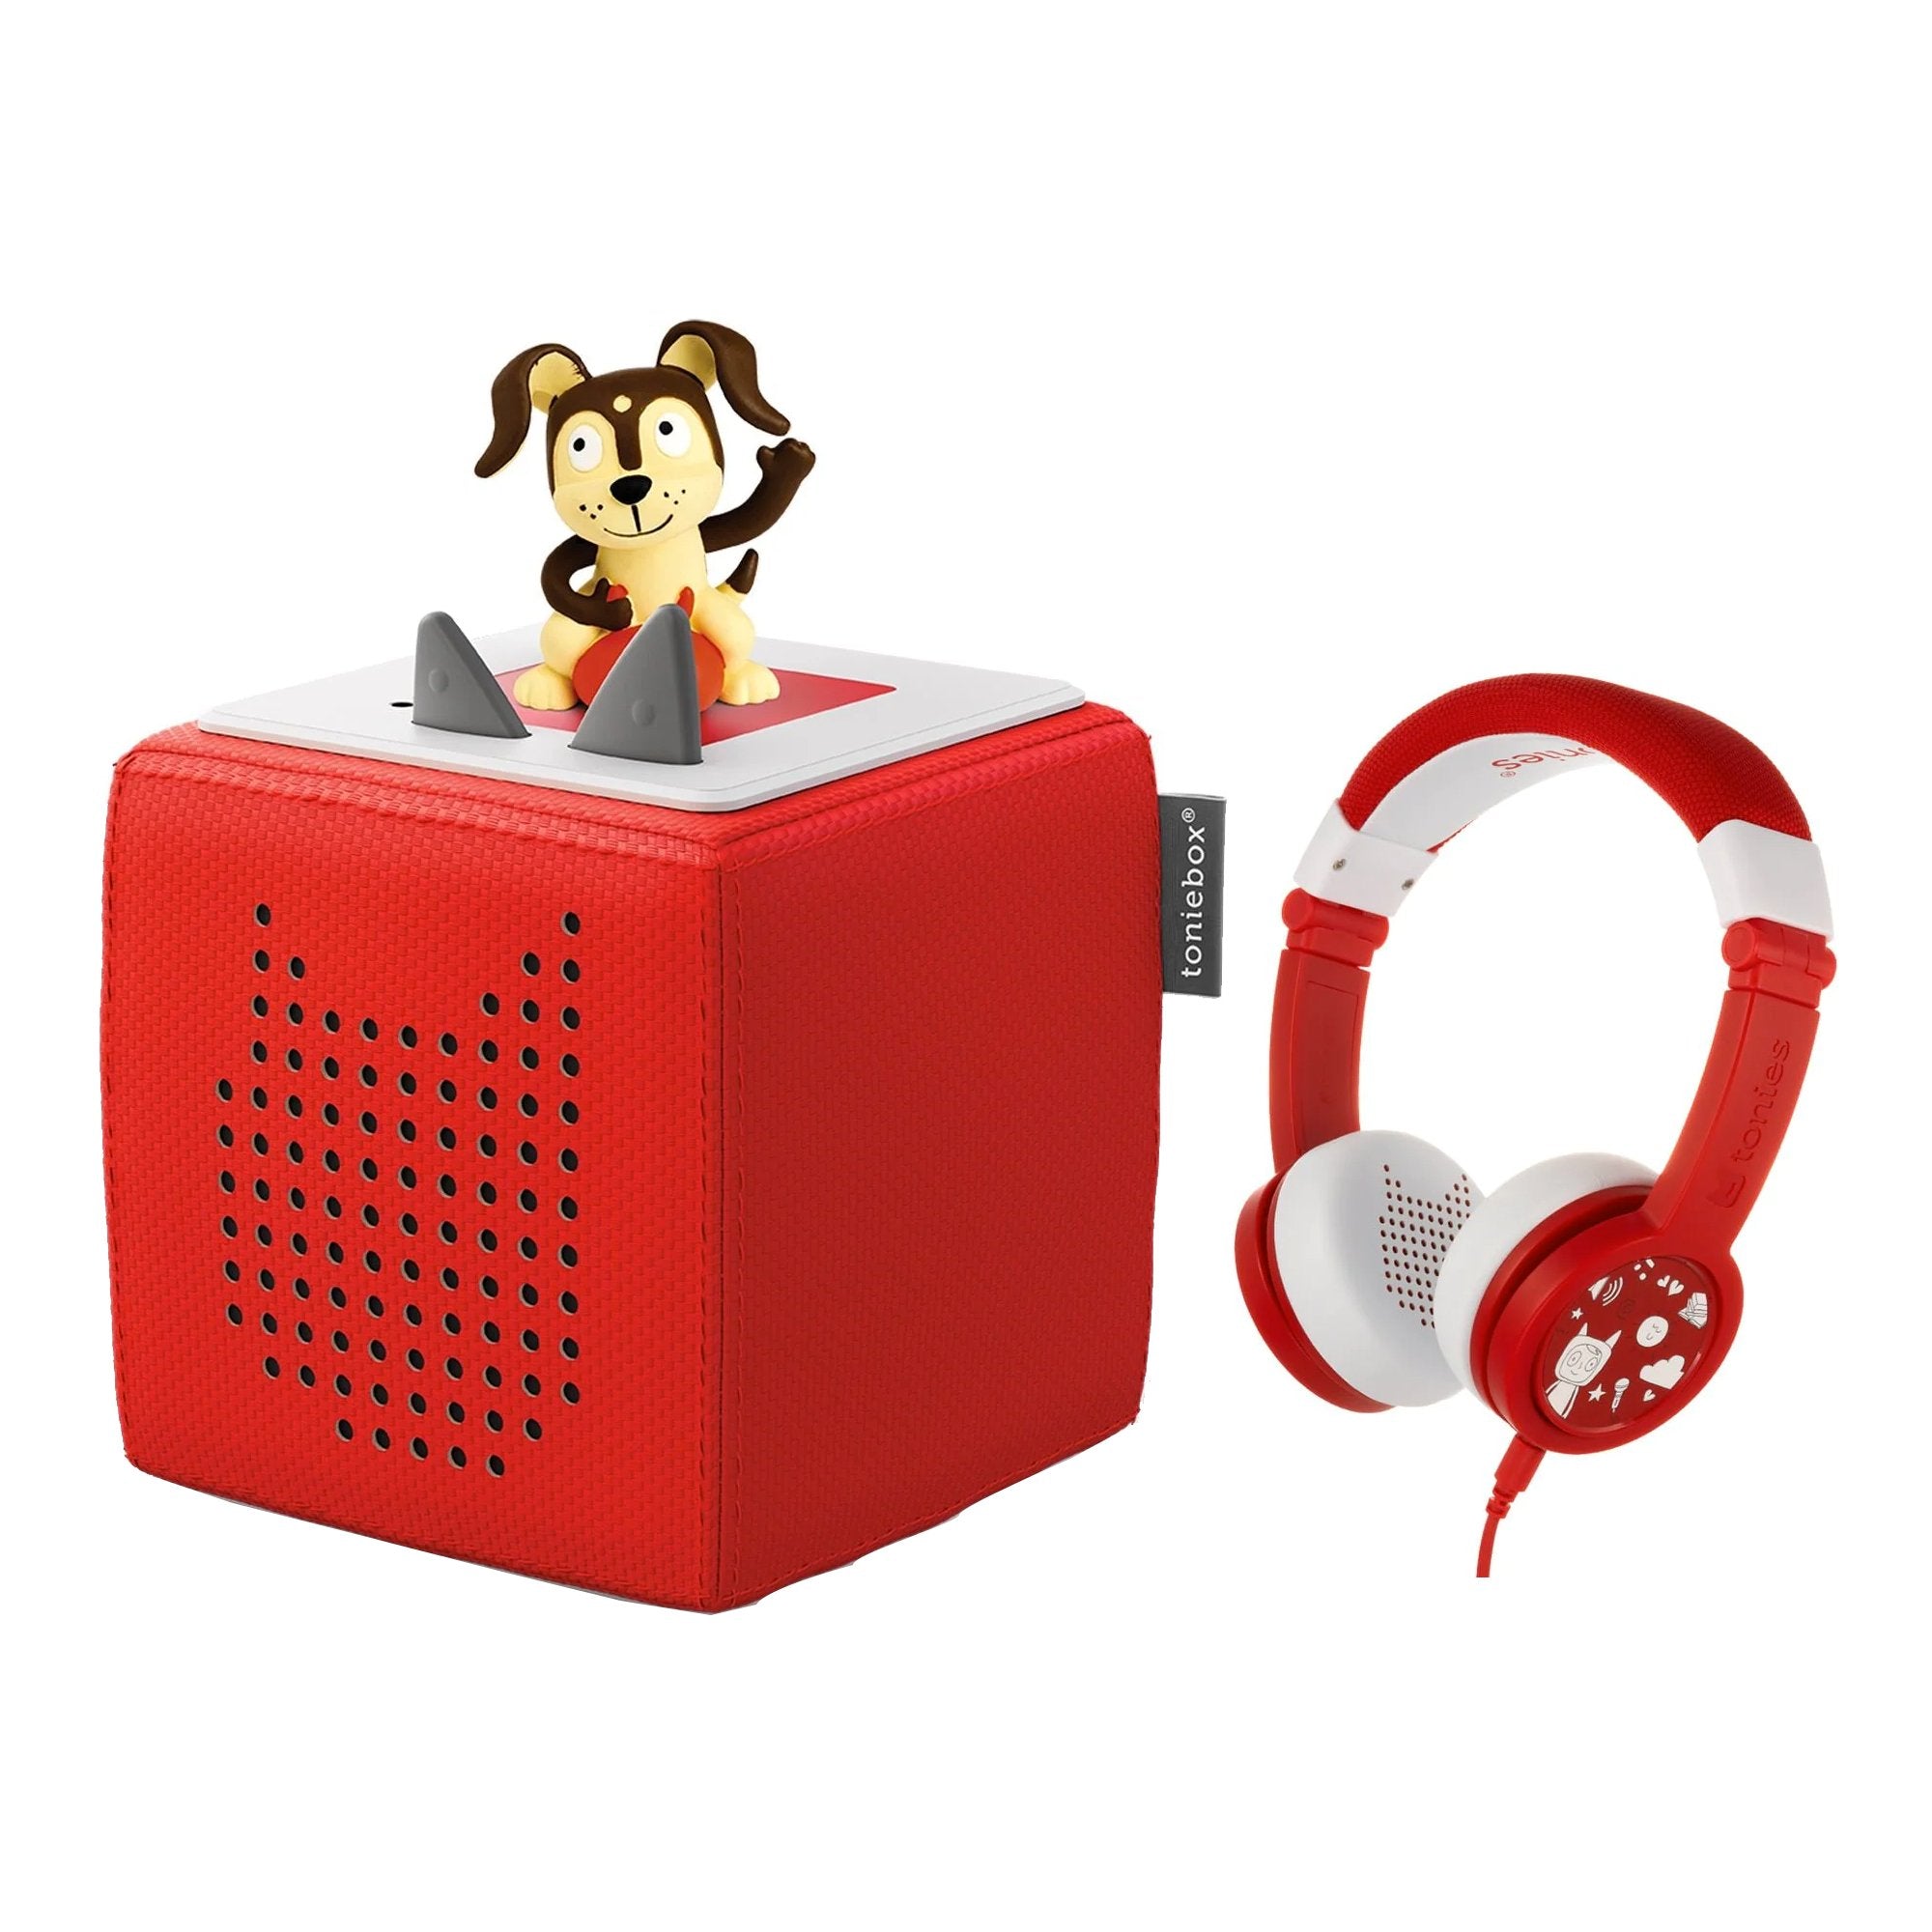 Tonies Toniebox Playtime Puppy Starter Set with Foldable Headphones - Red